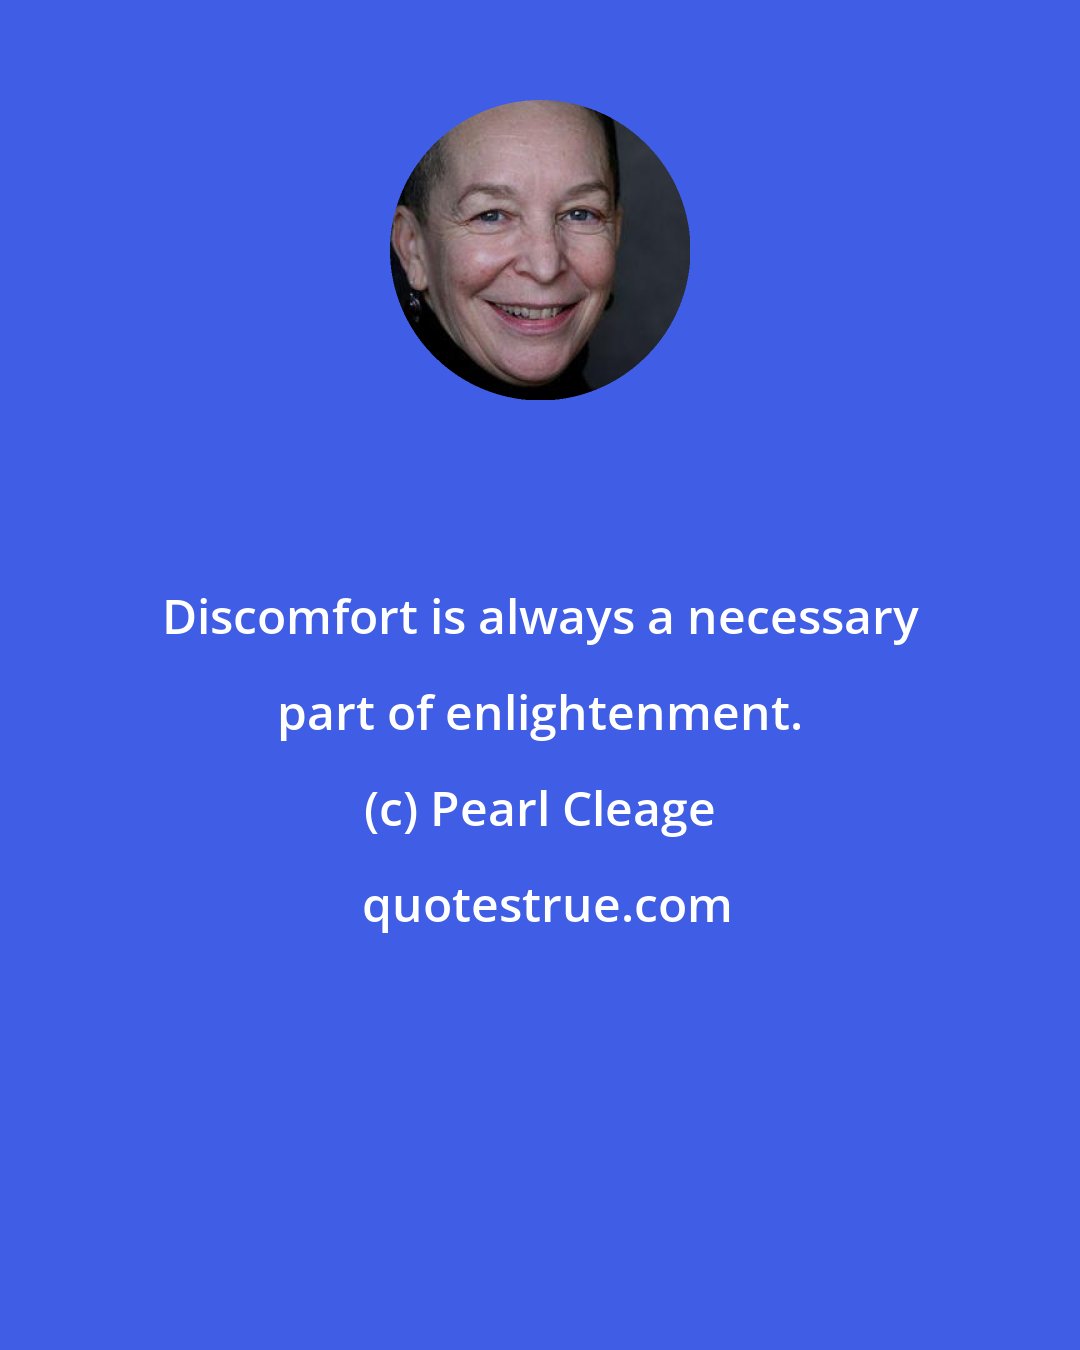 Pearl Cleage: Discomfort is always a necessary part of enlightenment.